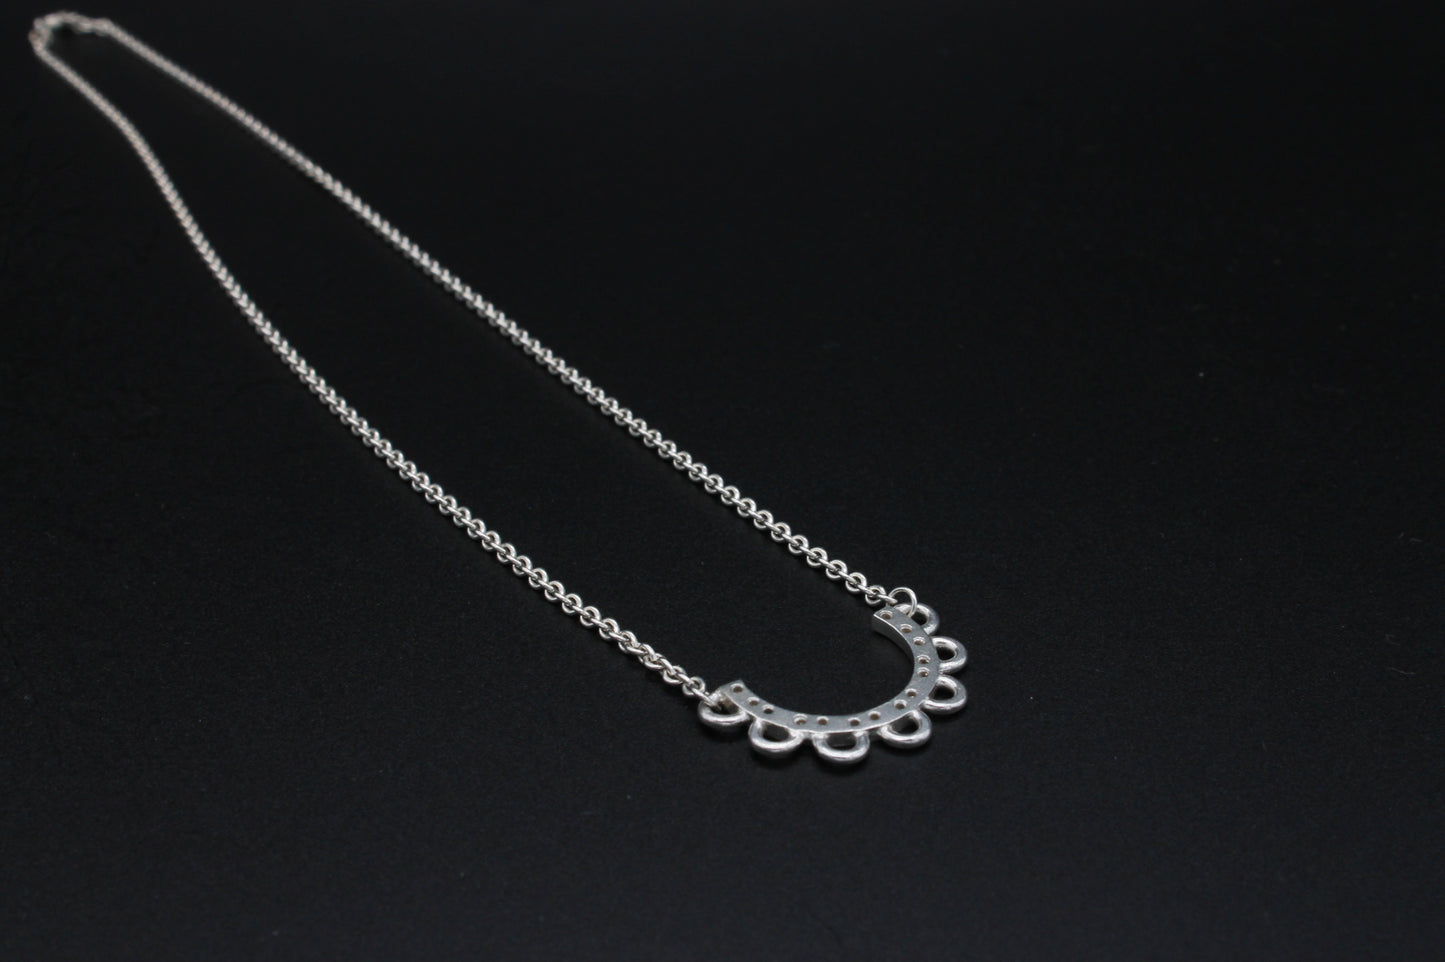 Limerick Lace Inspired Silver Chain by Marianne Kenny